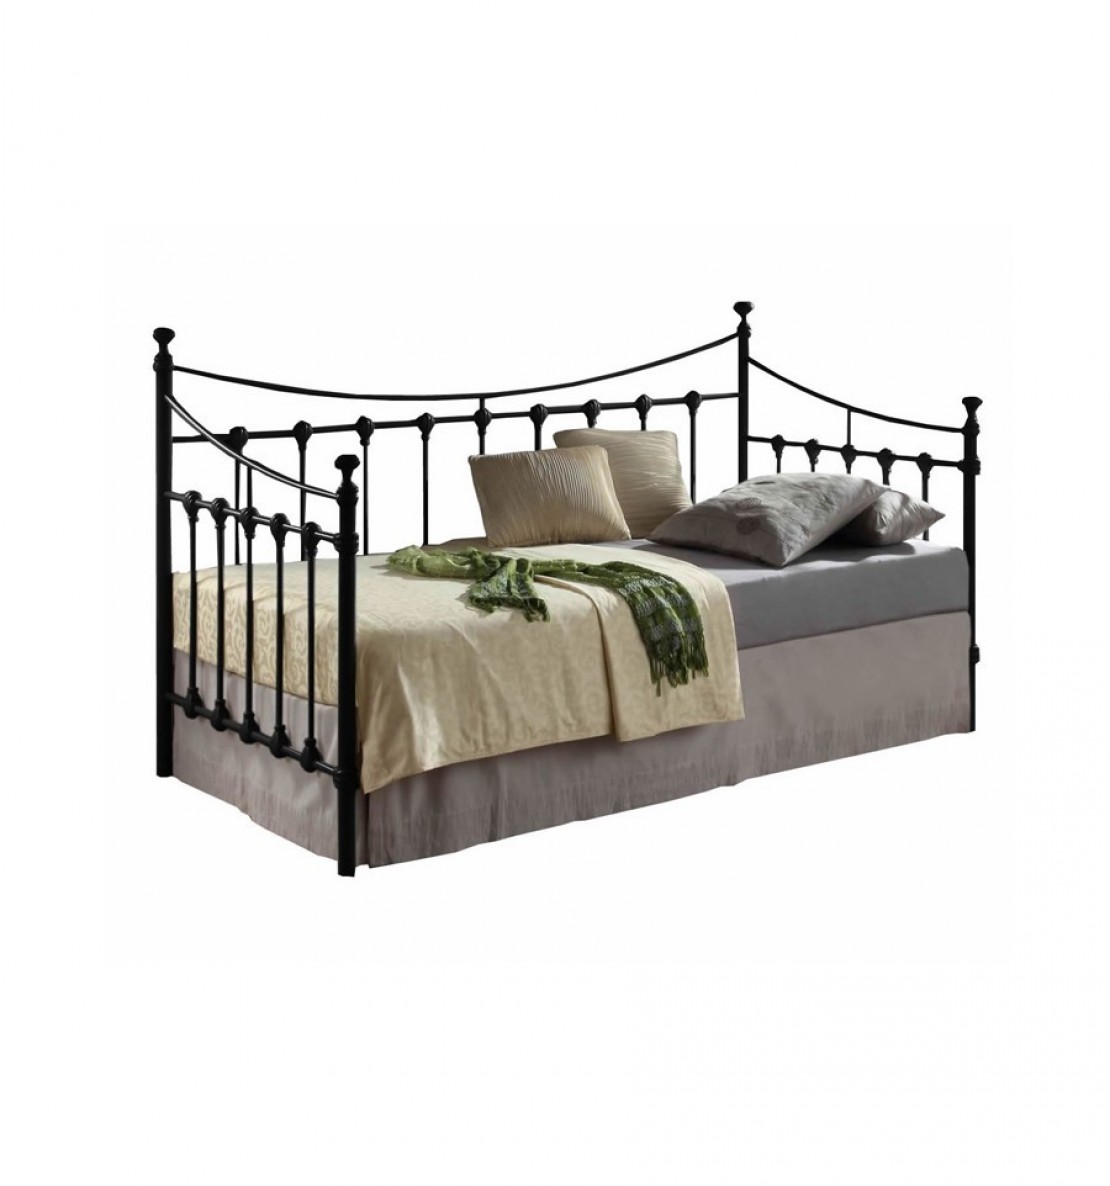 /_images/product-photos/time-living-florida-black-day-bed-a.jpg